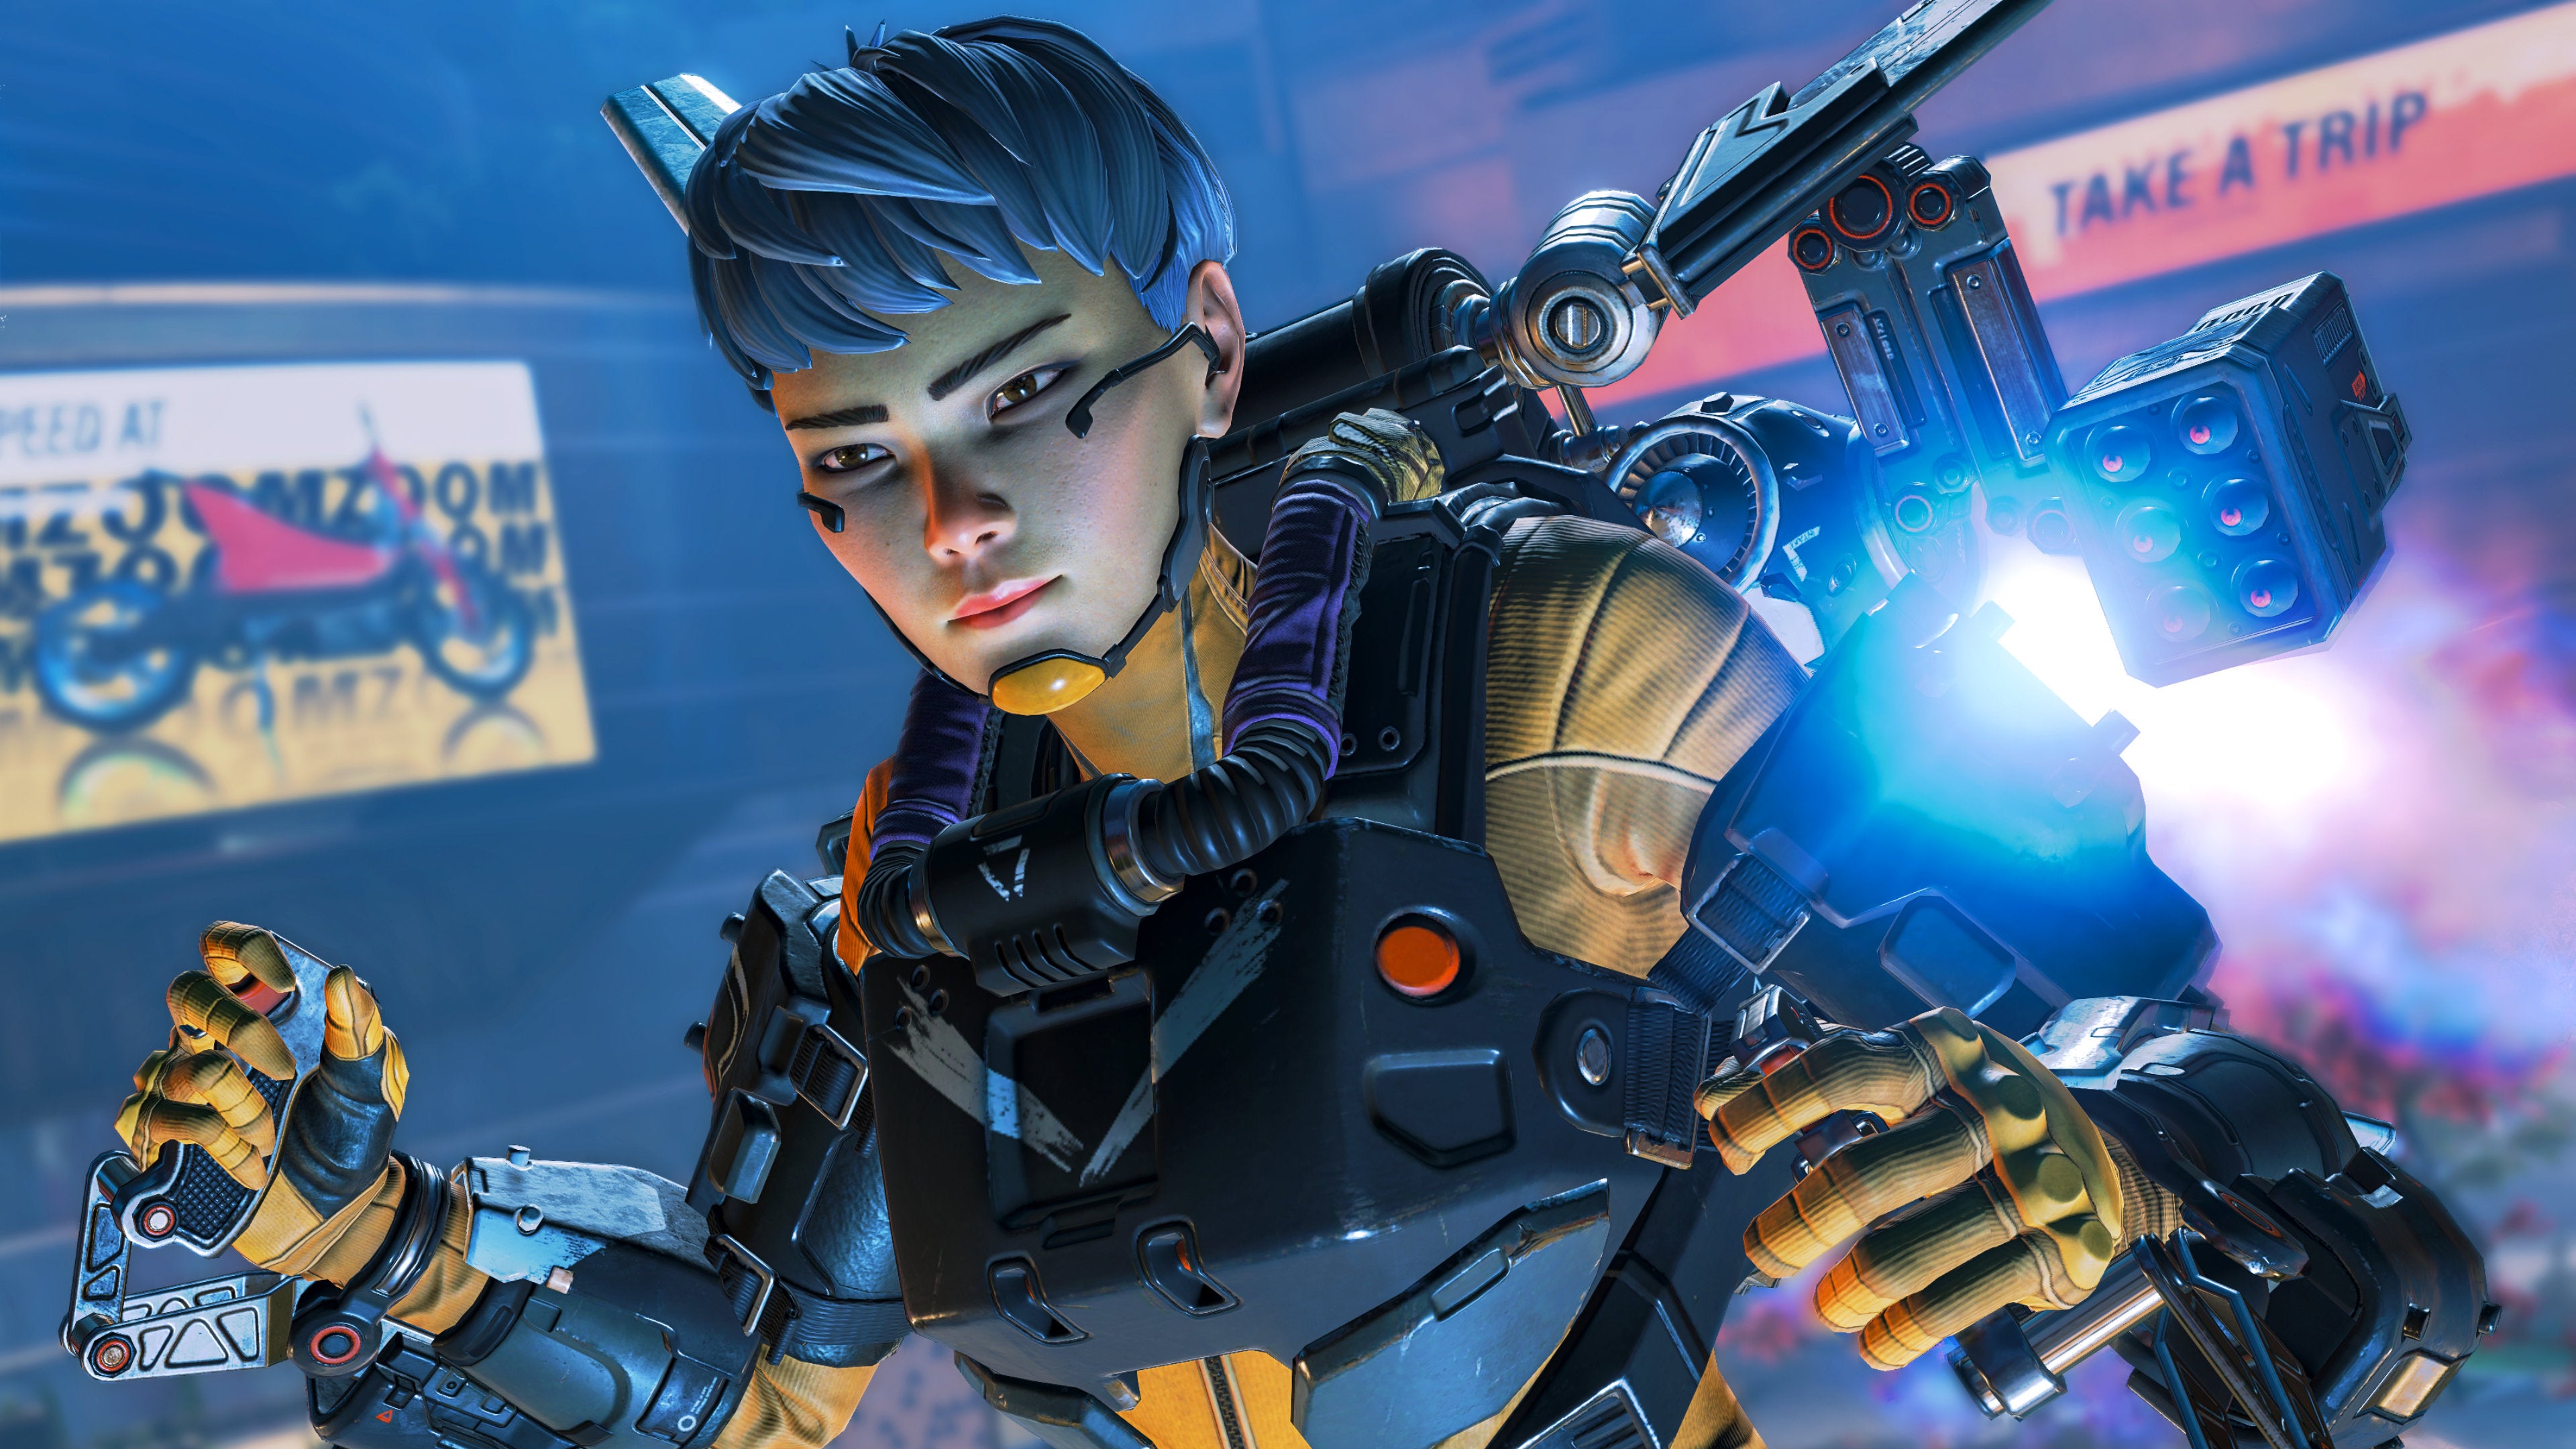 Valkyrie HD Apex Legends Wallpapers  HD Wallpapers  ID 107922